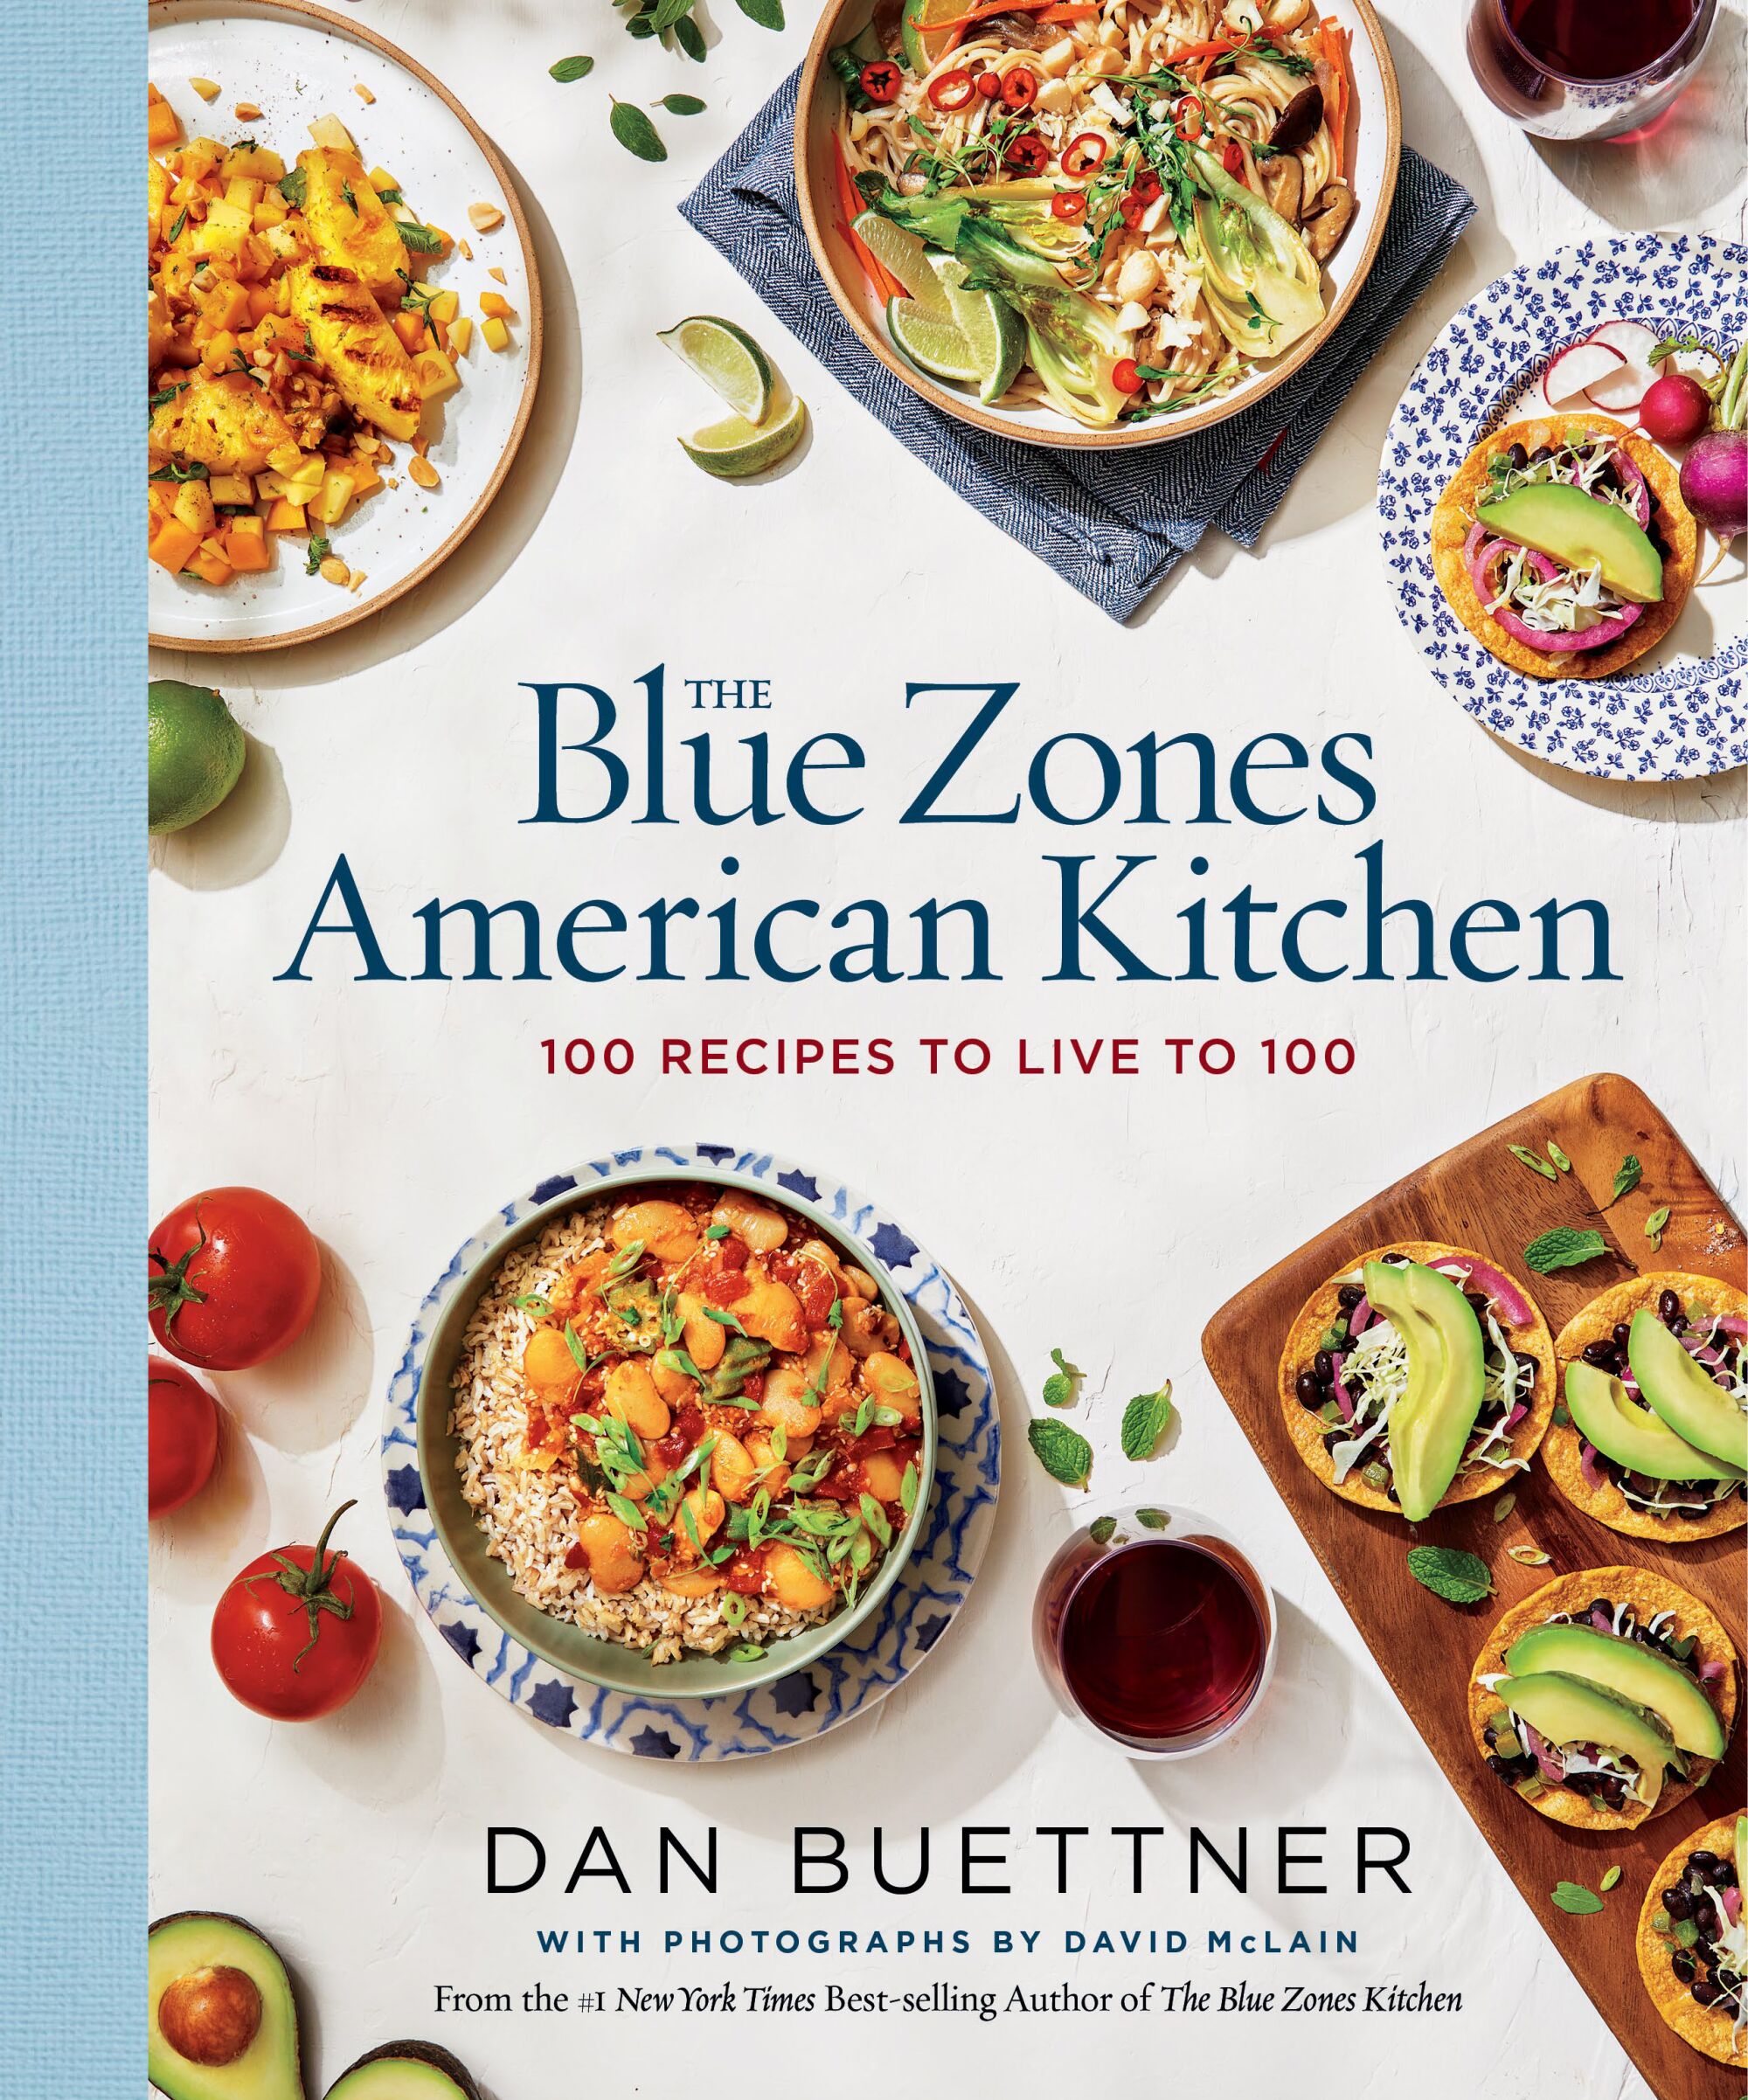 The Blue Zones American Kitchen: 100 Recipes To Live To 100 by Dan Buettner with photographs by David McLain.